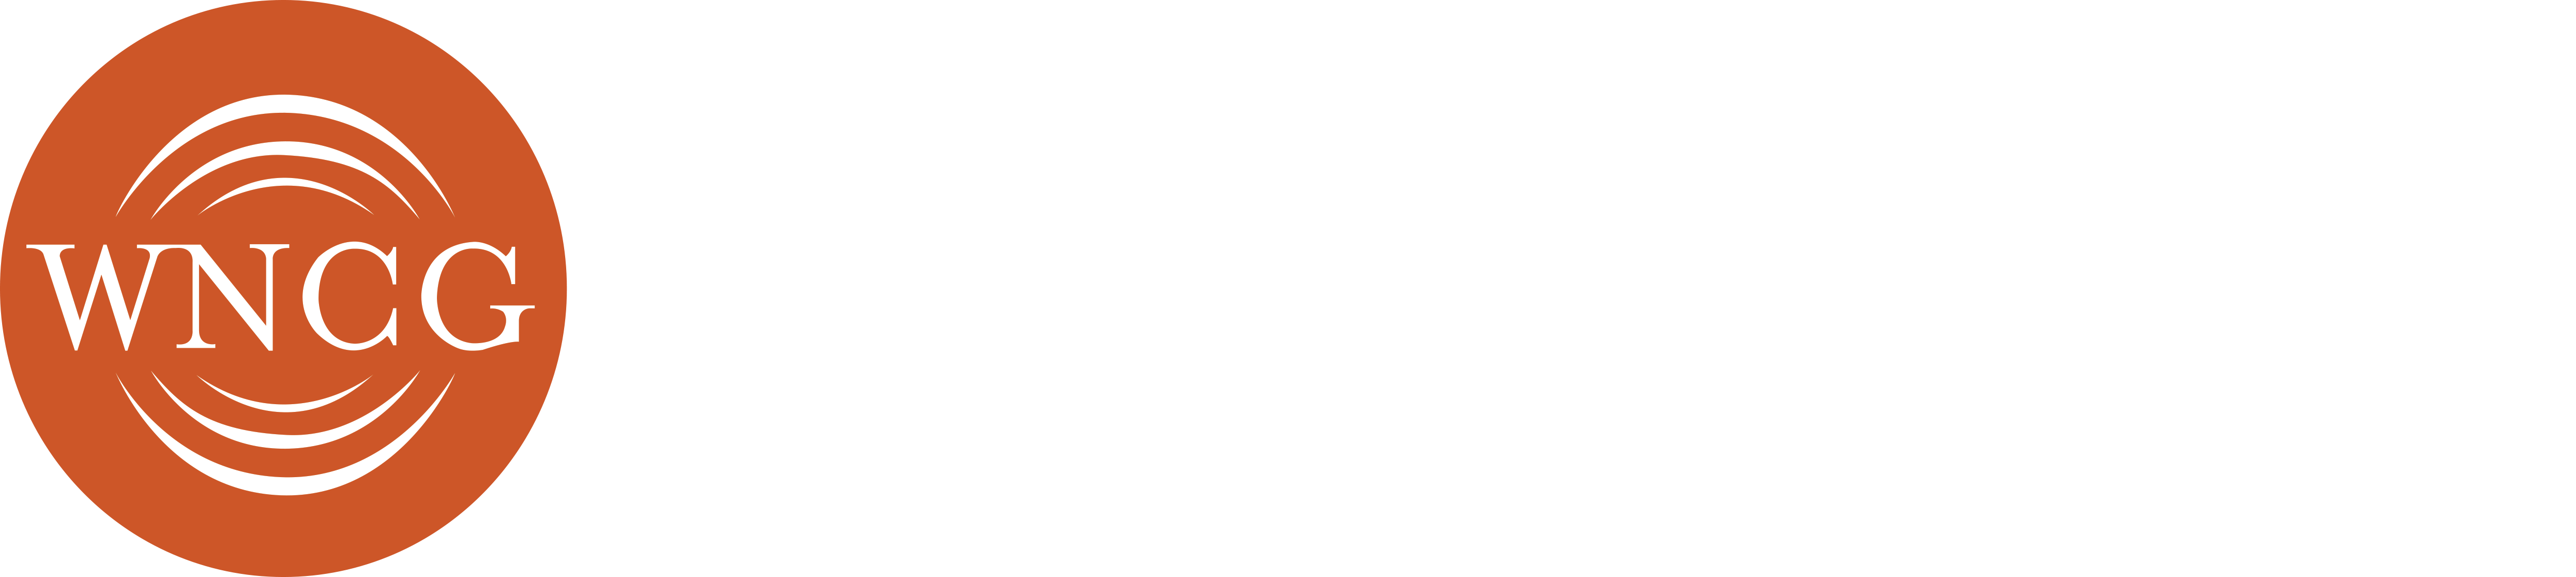 Wireless and Networking Communications Group